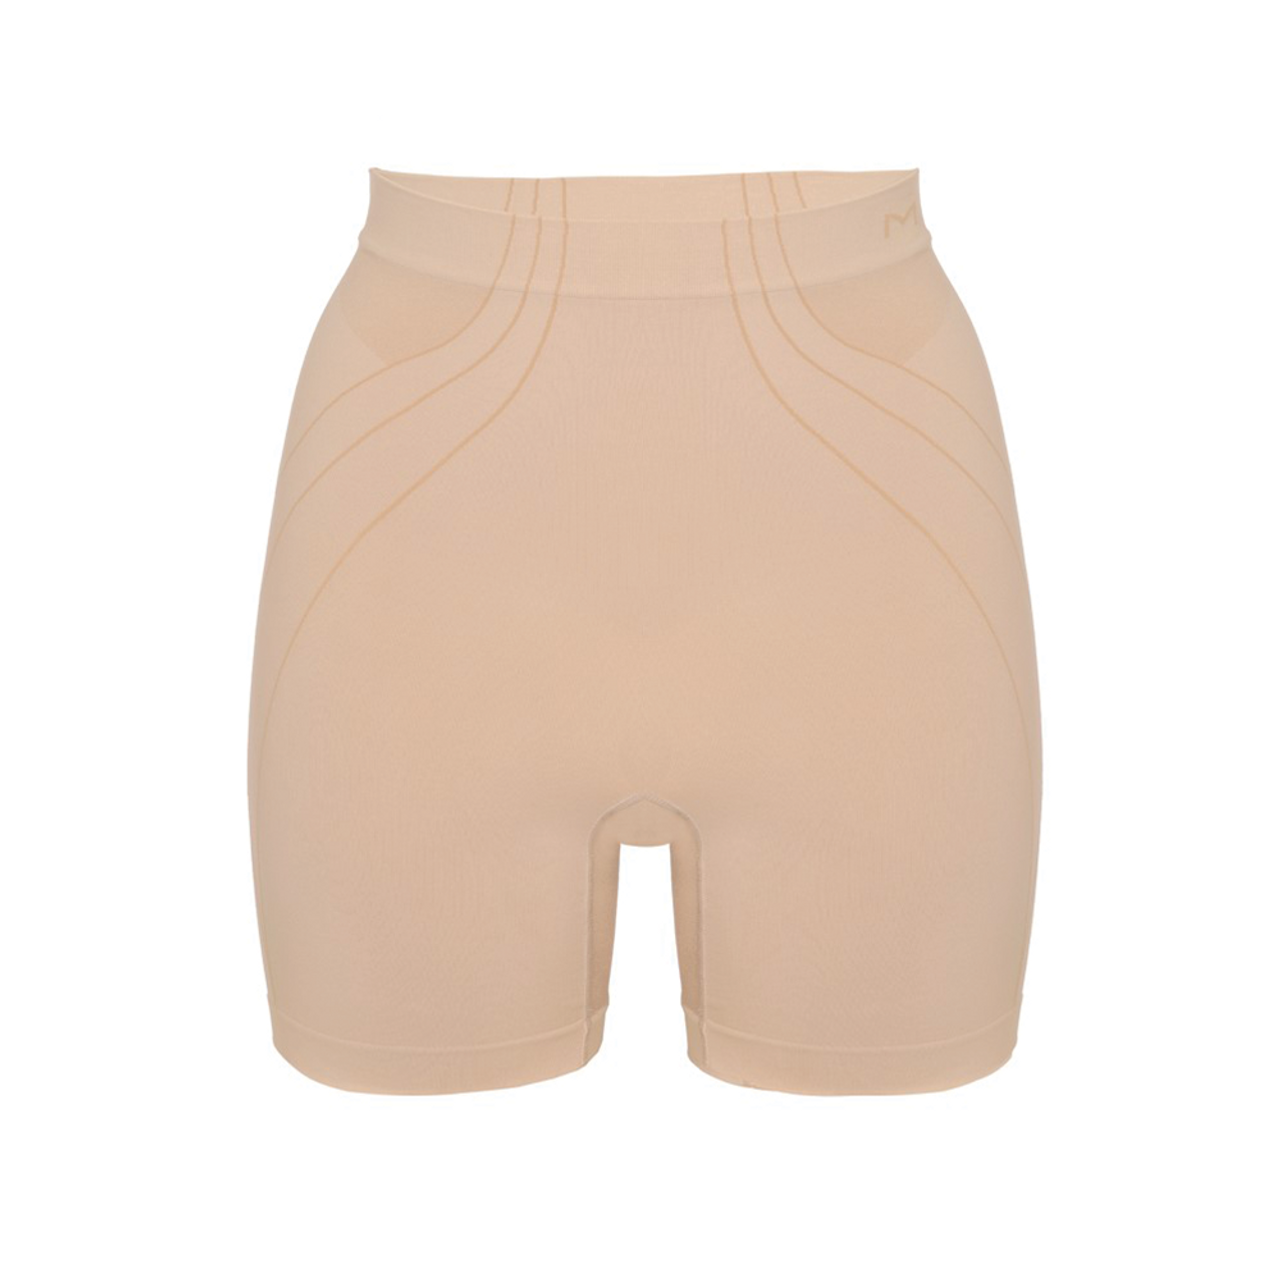 $52 Maidenform Women's Beige High Waisted Firm Control Shorts Shapewear  Size M